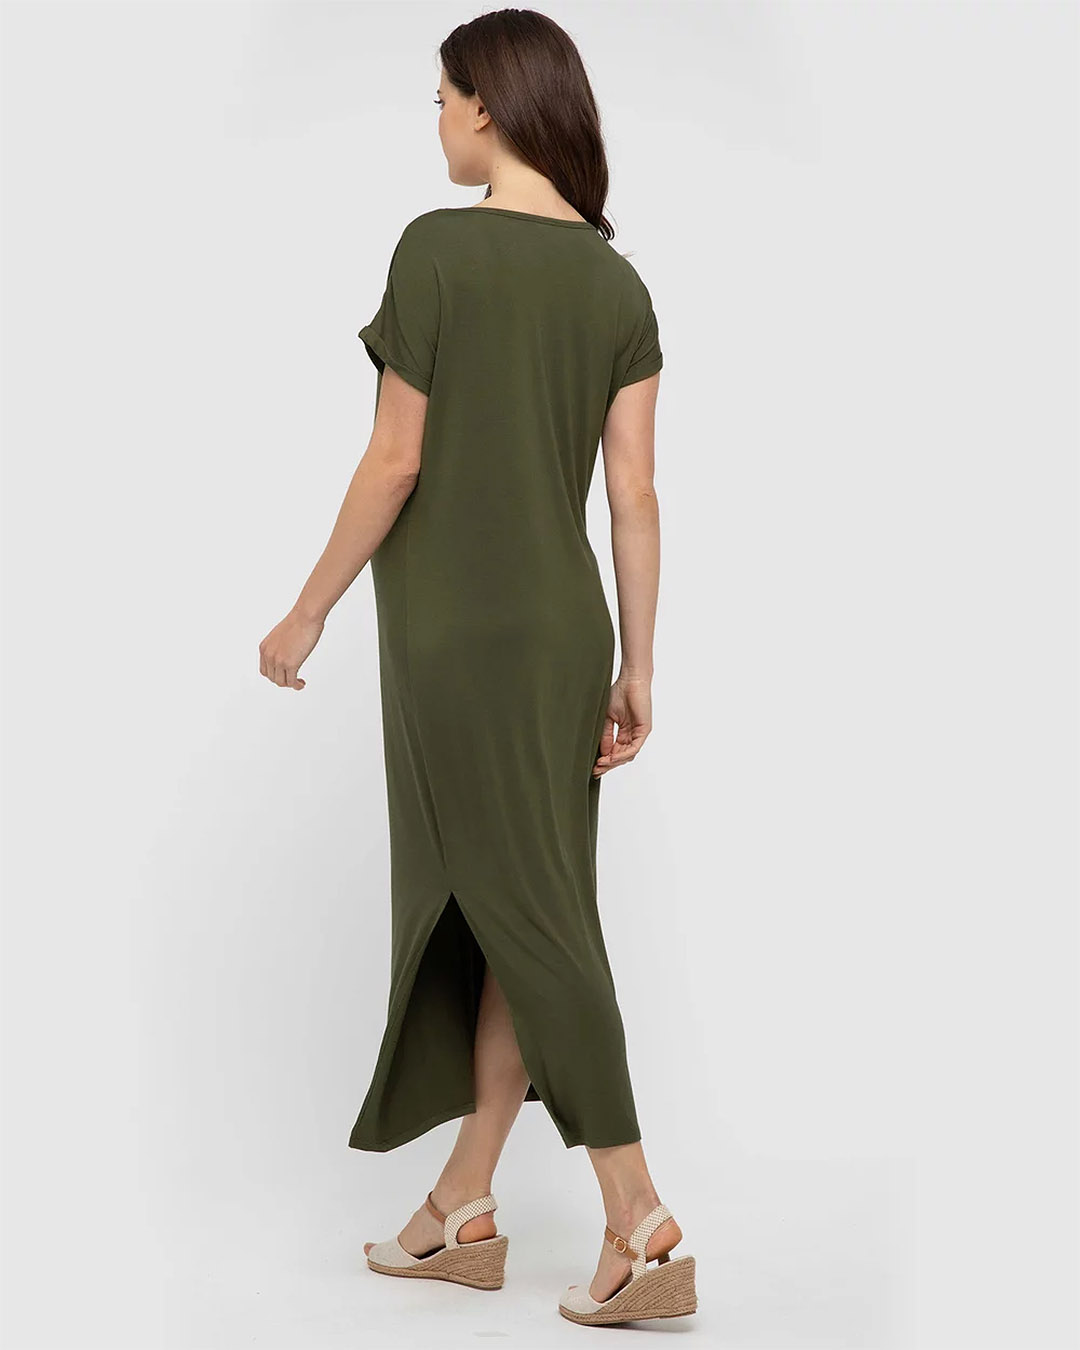 A pregnant woman wears a dark green bamboo jersey ankle-length dress with a side split. 